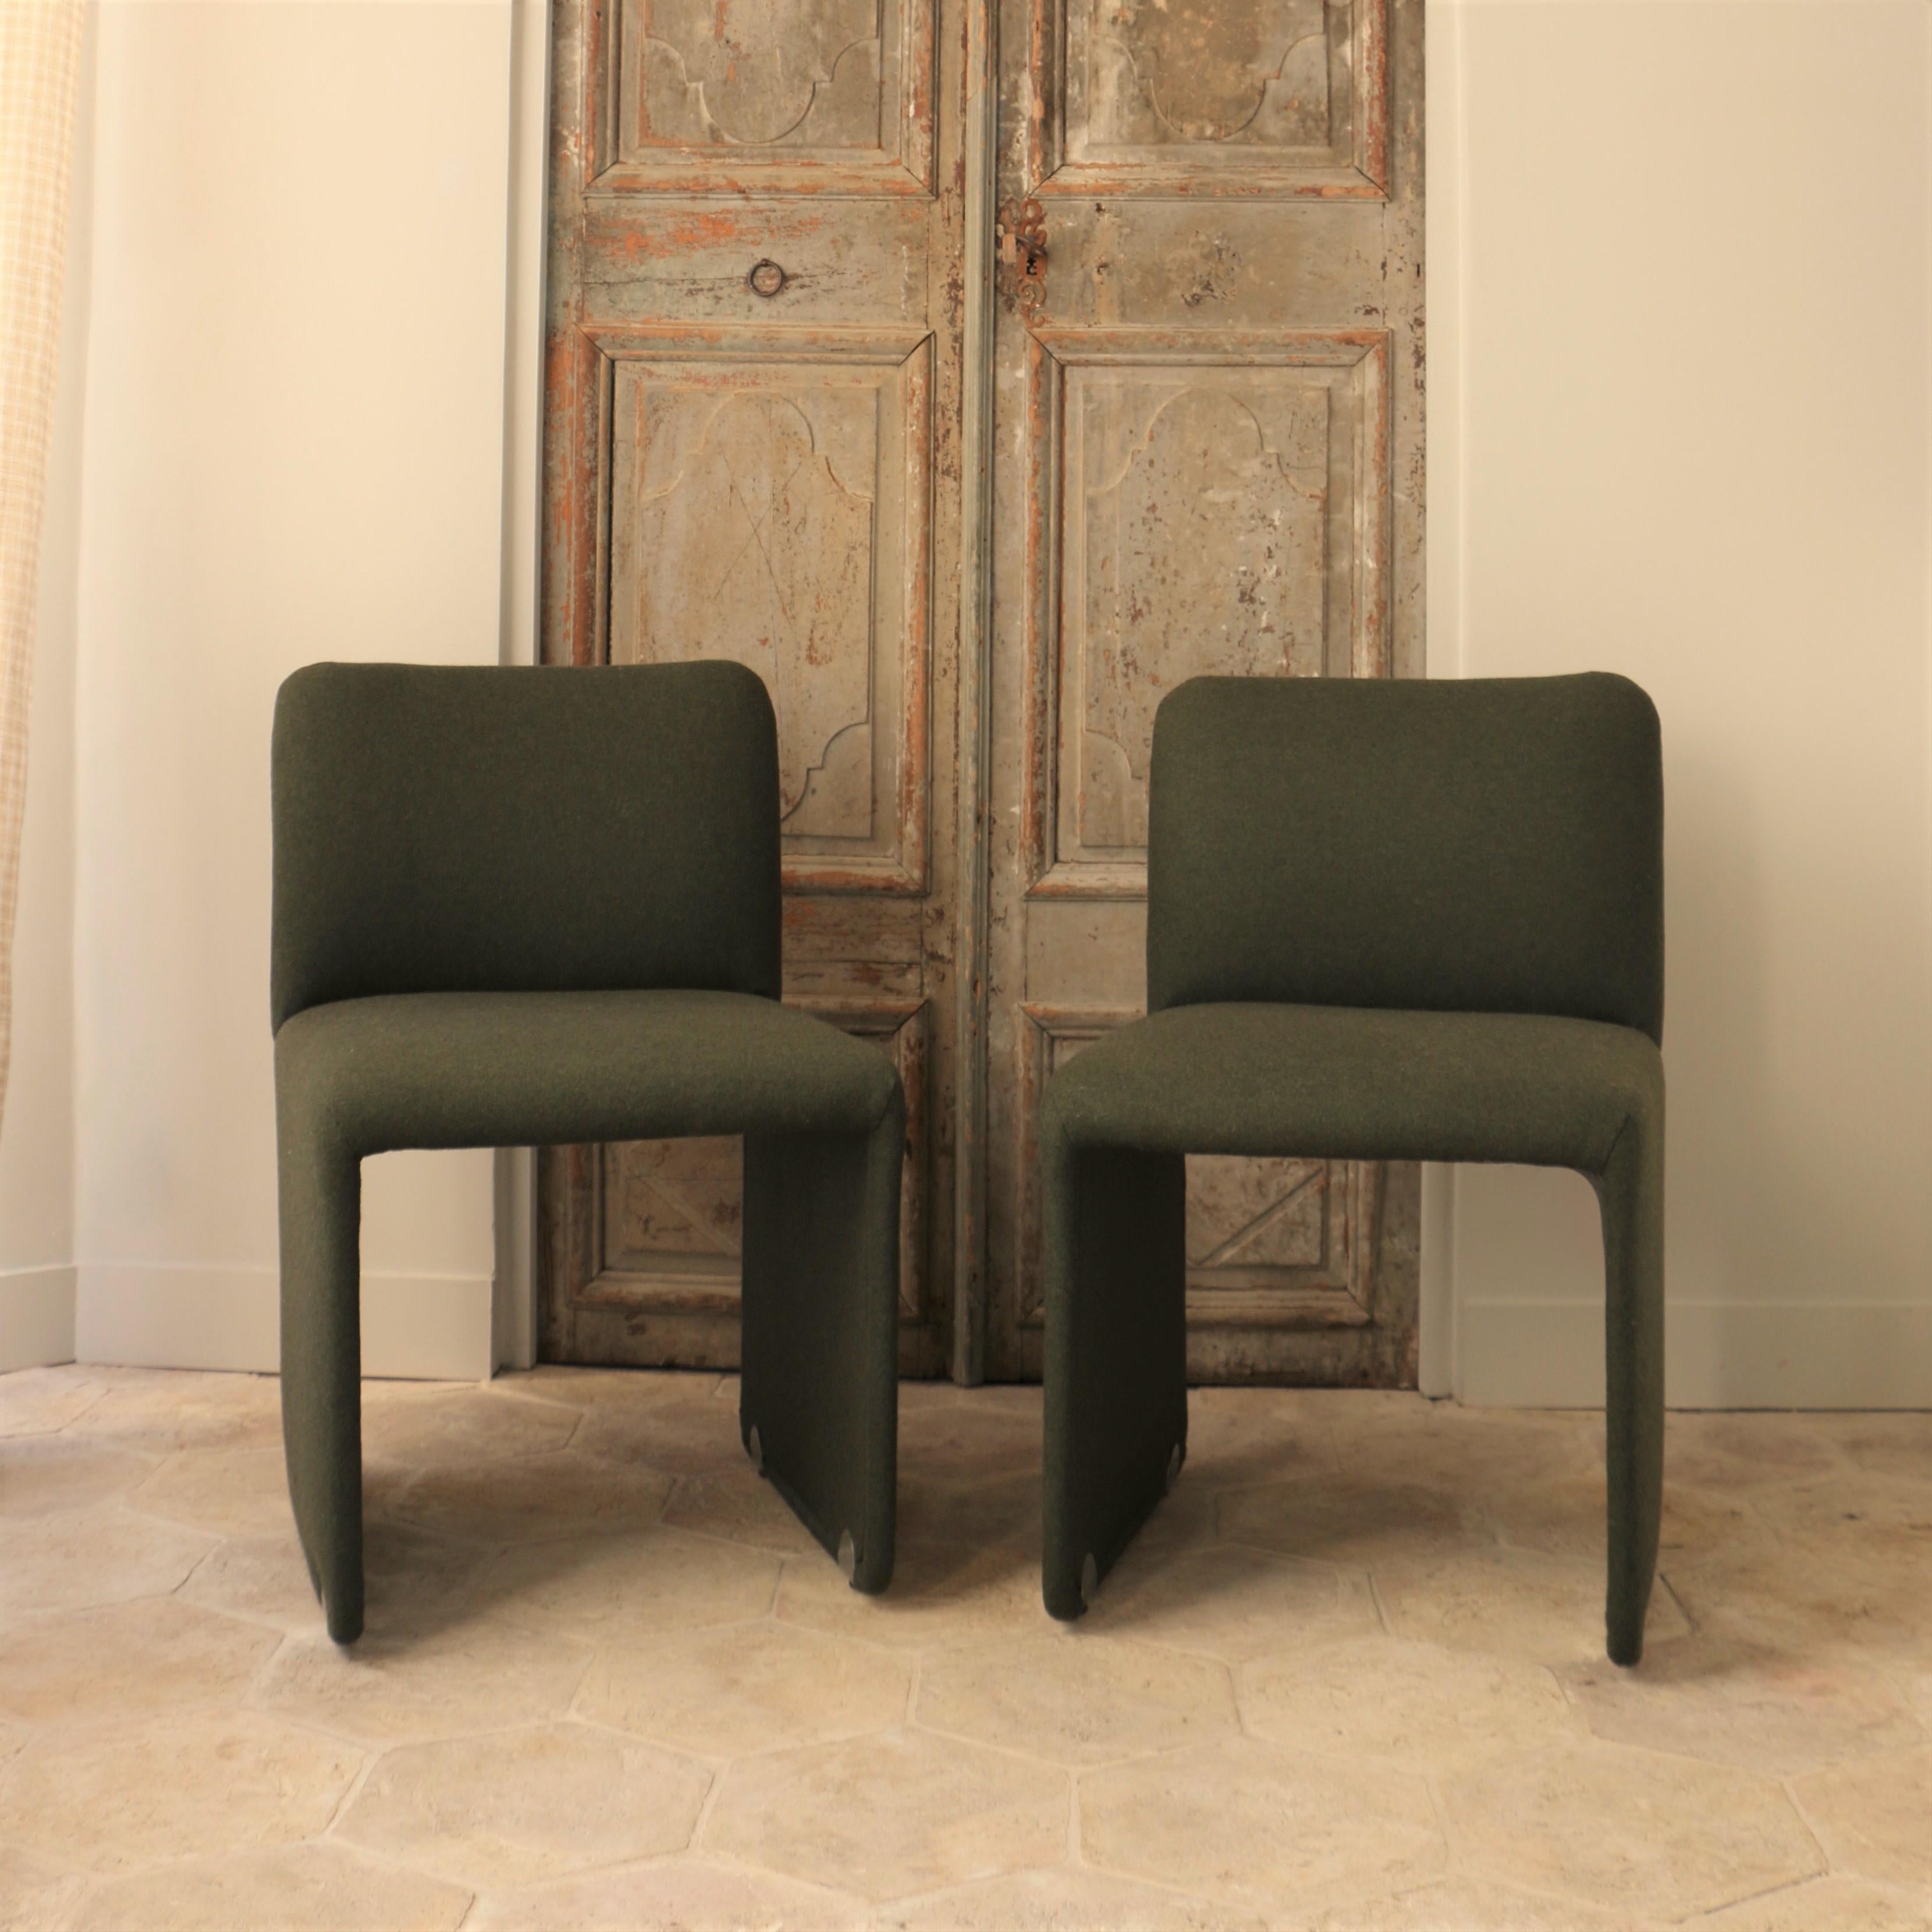 Set of four chairs, covered with a flannel fabric from Casamance, reinforced by a metal piece at the feet, in style of the French designer Pierre Paulin.